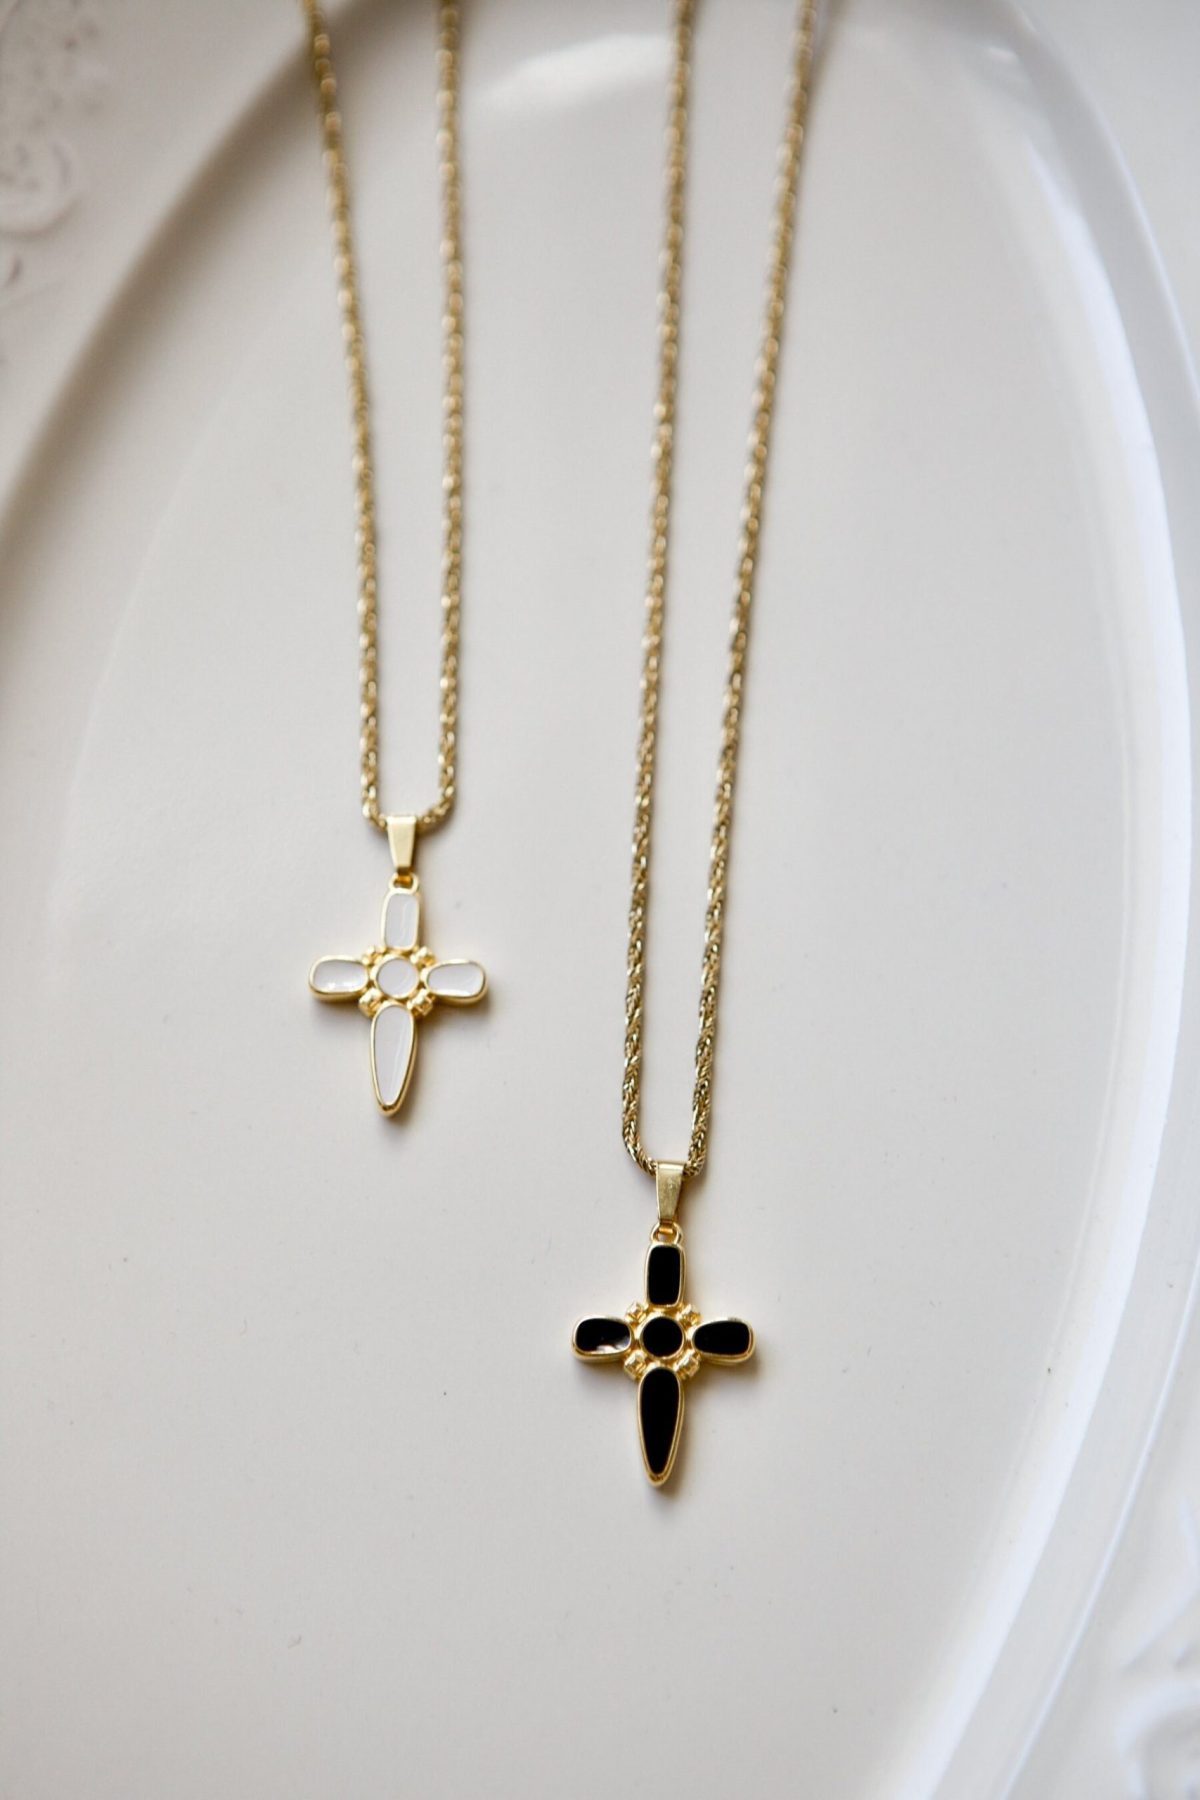 black cross necklace christian religious jewelry baptism spiritual gift scaled